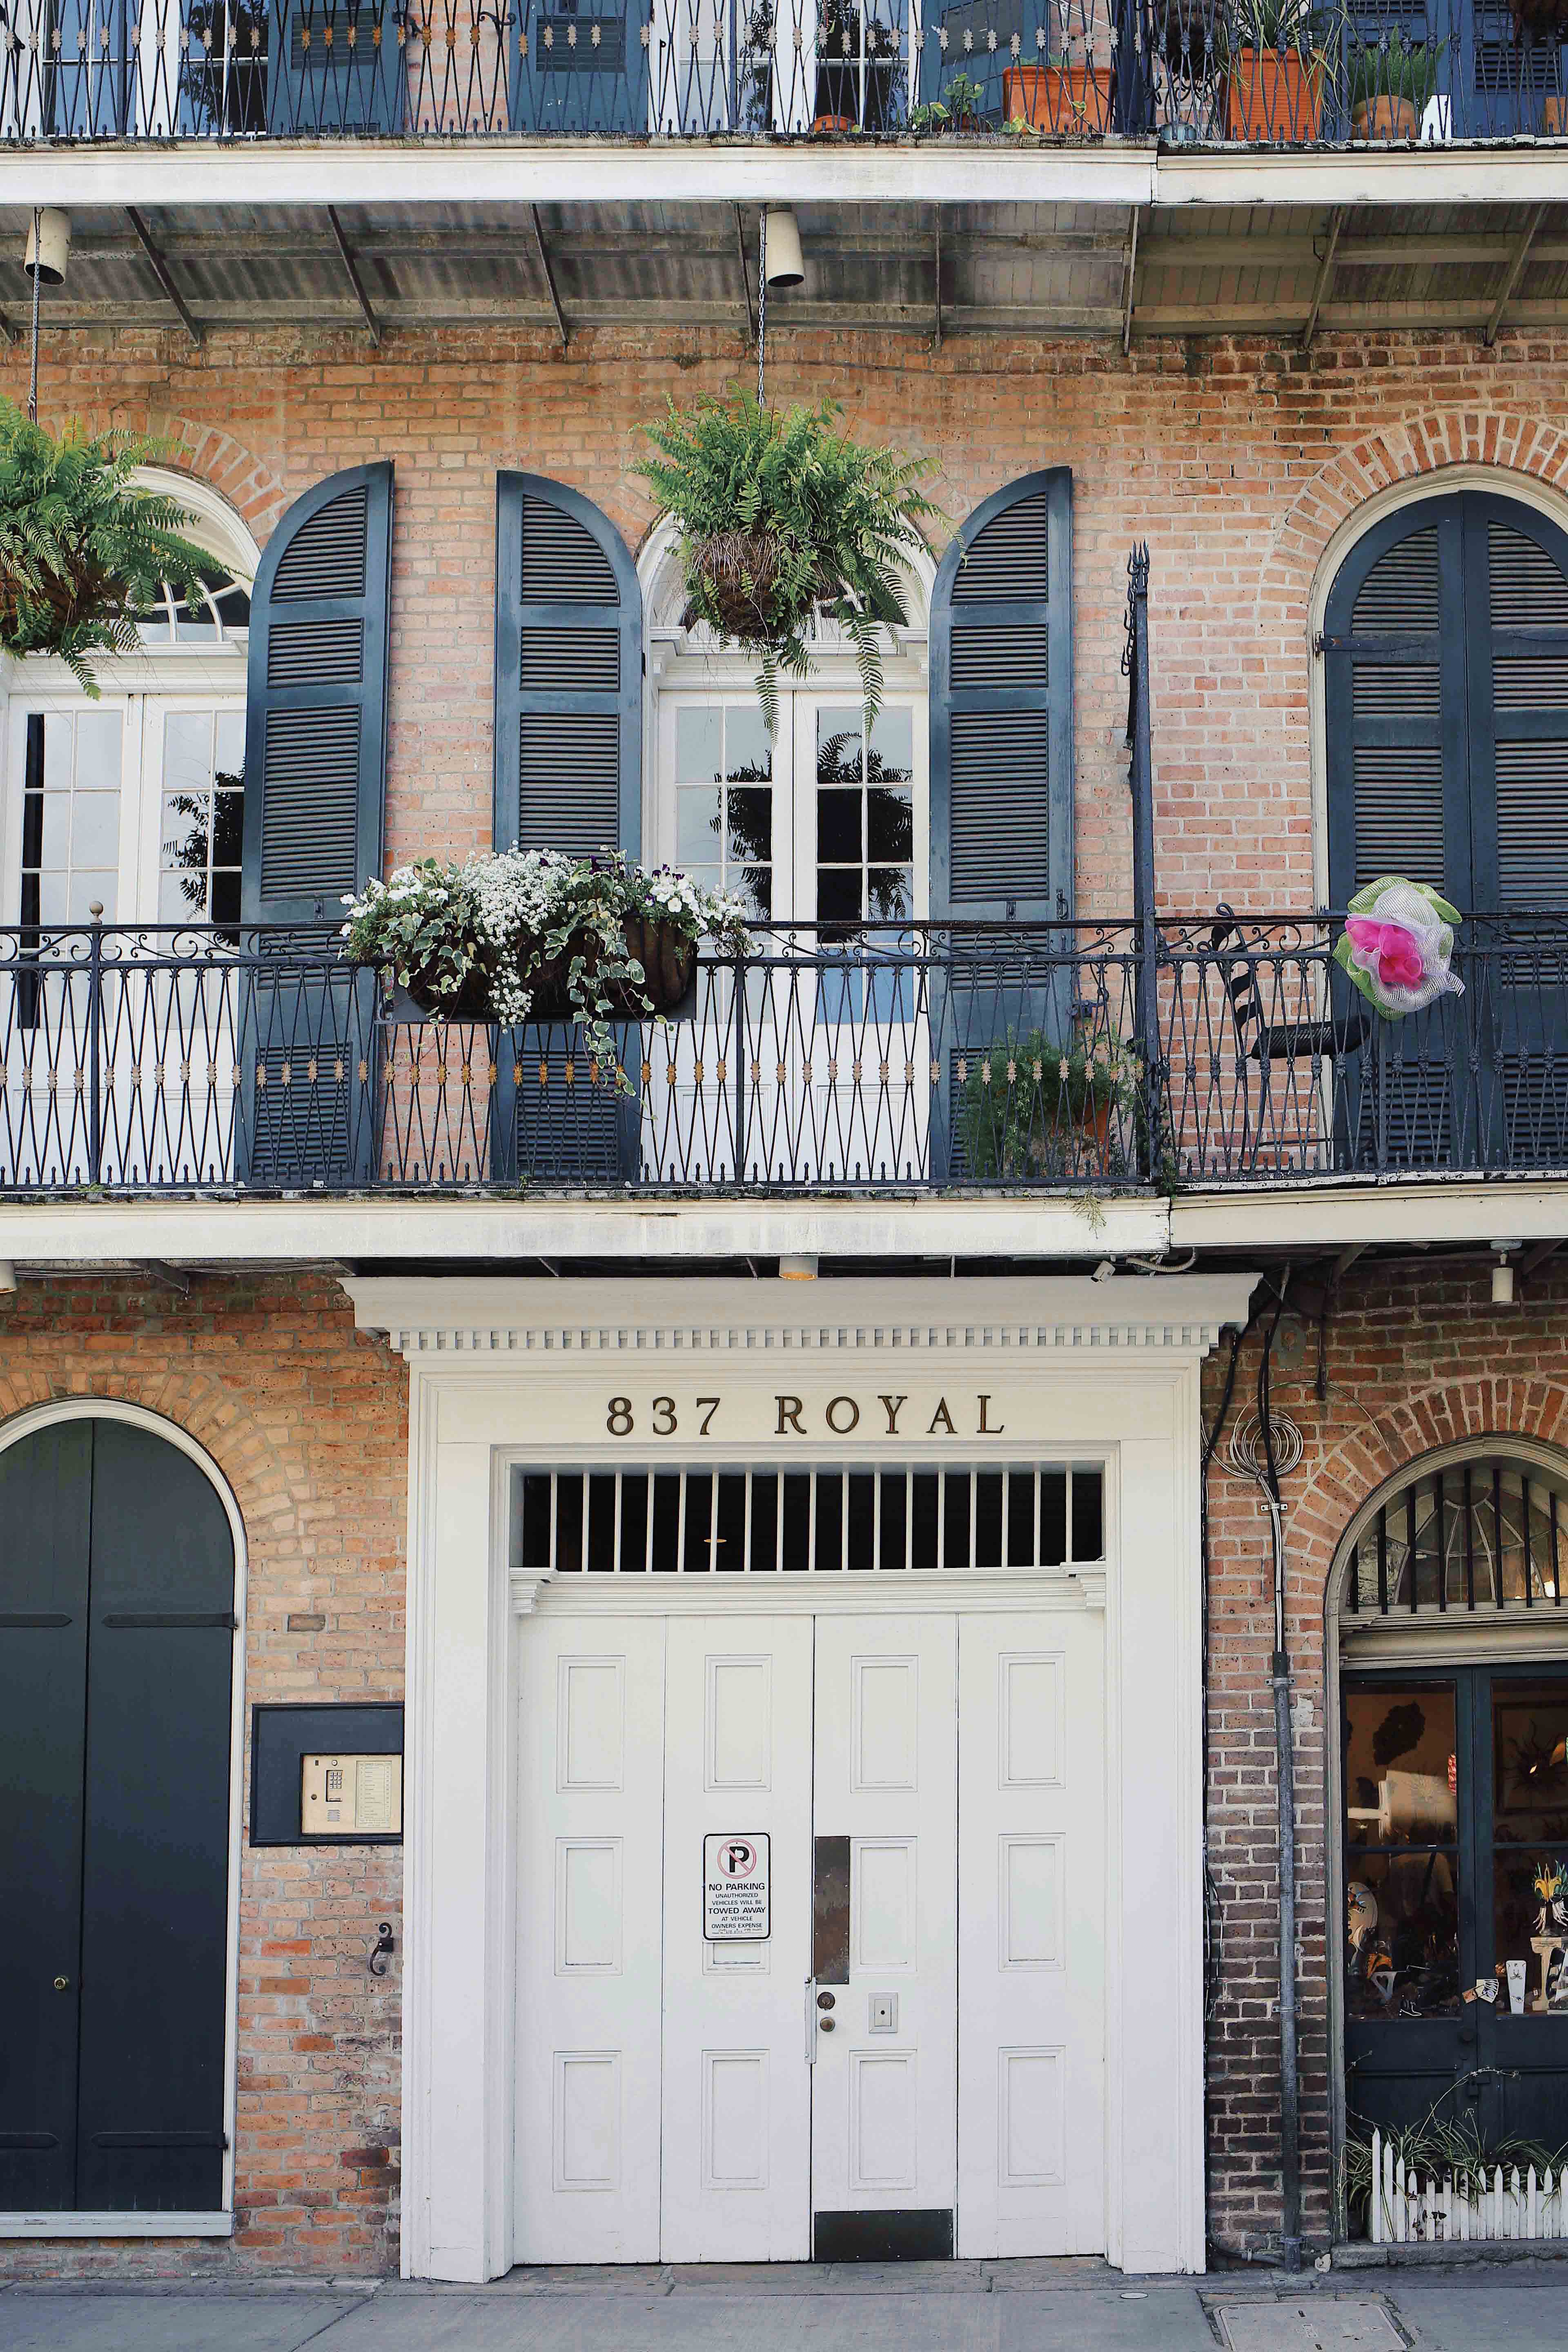 Royal street shopping French quarter - New Orleans Travel Guide - NOLA City guide - by fashion blogger Julia Comil